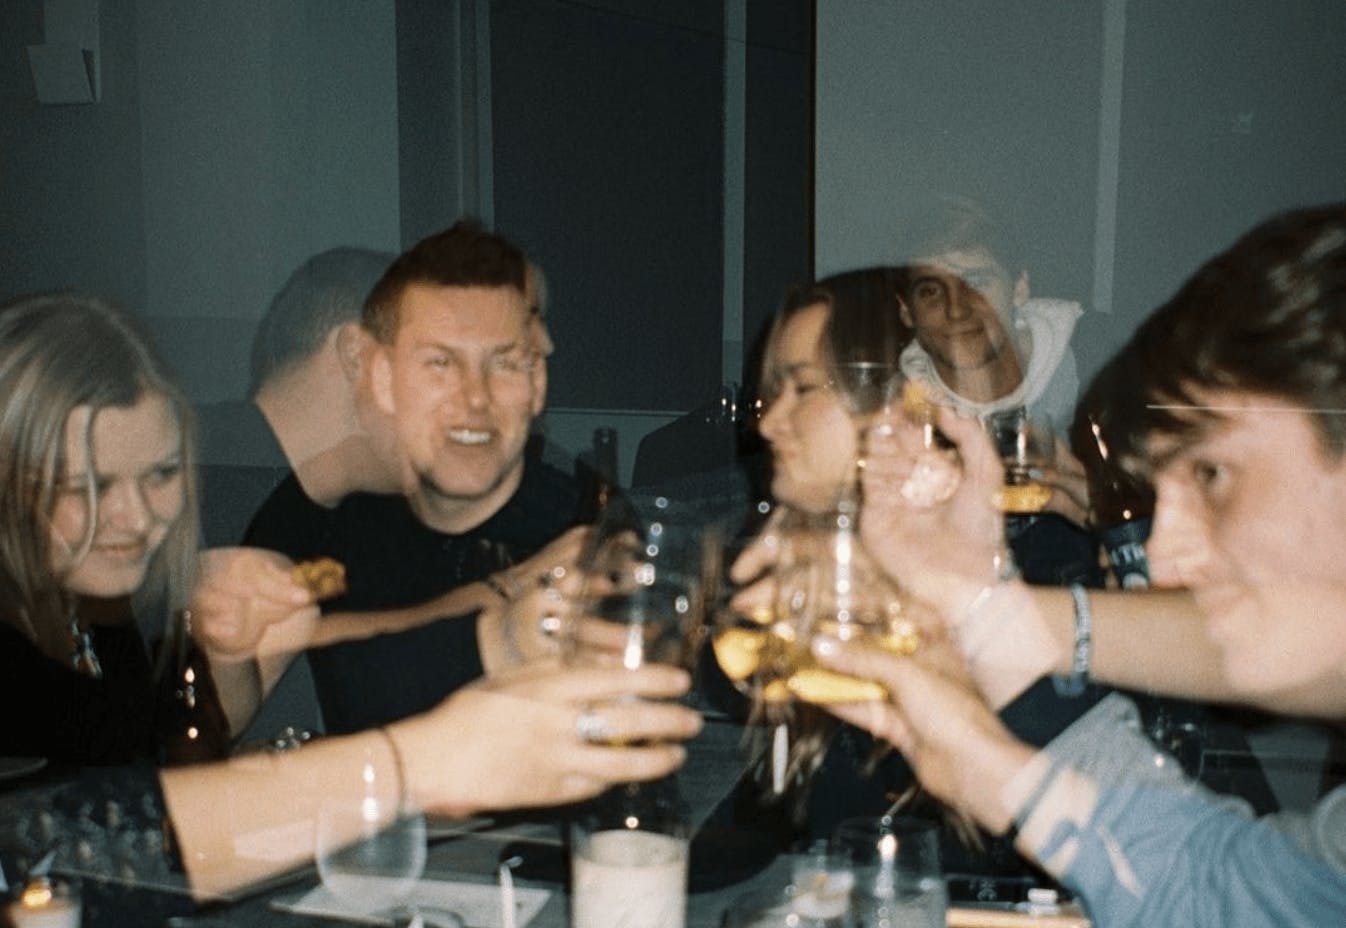 A film photo of people dining together